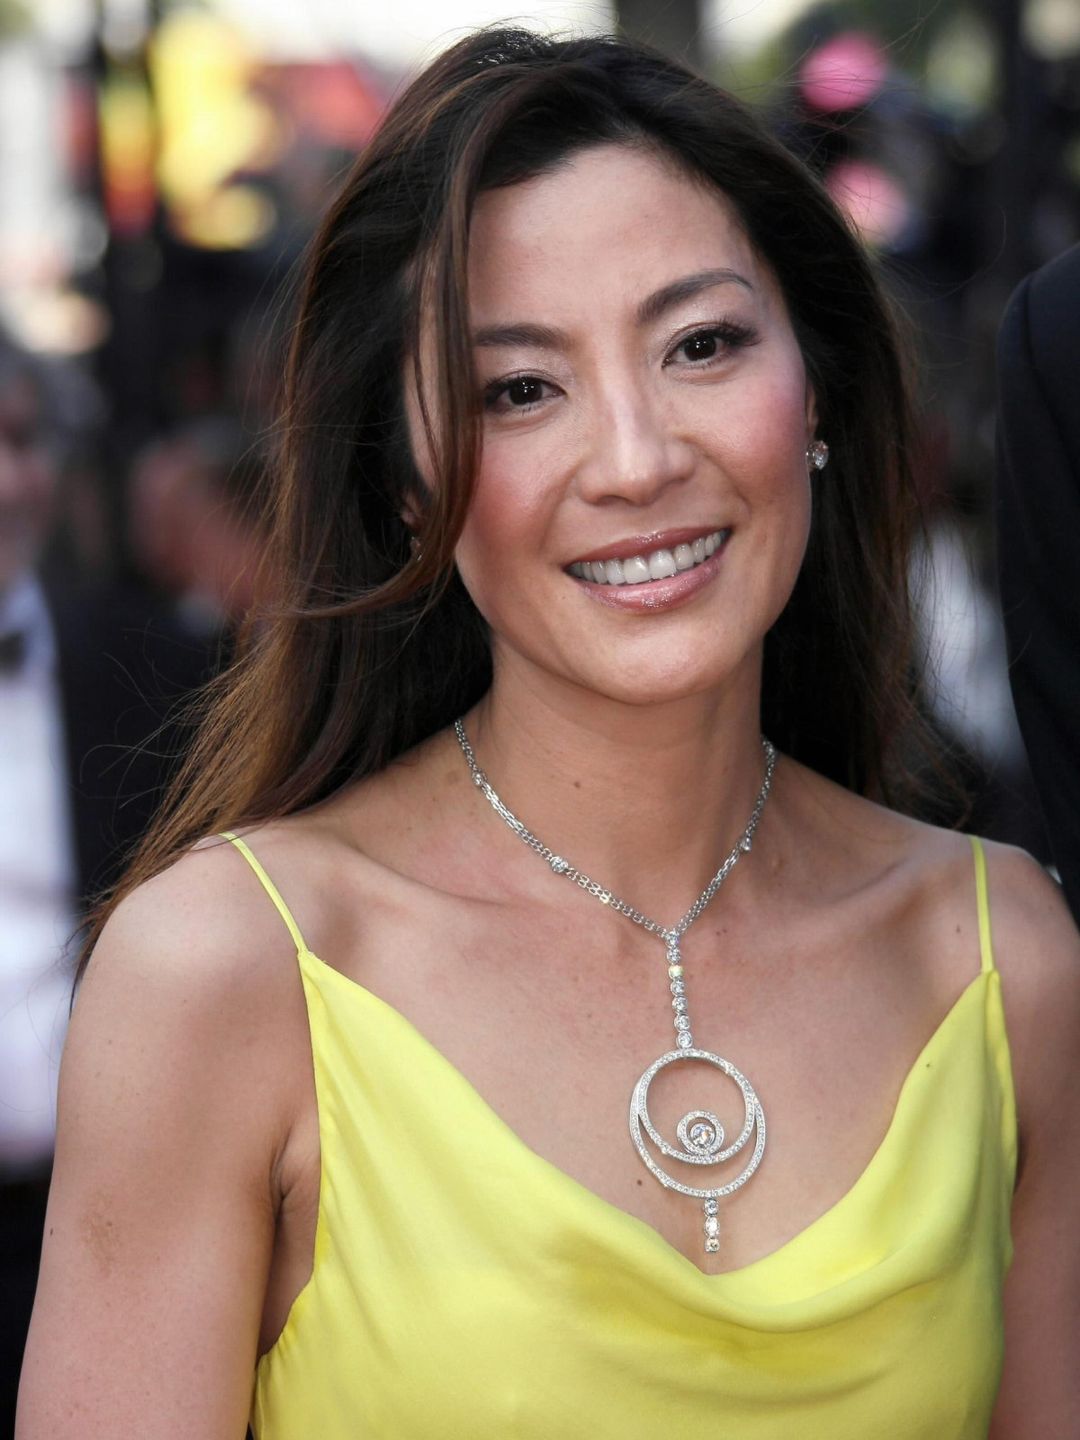 Michelle Yeoh who is her mother